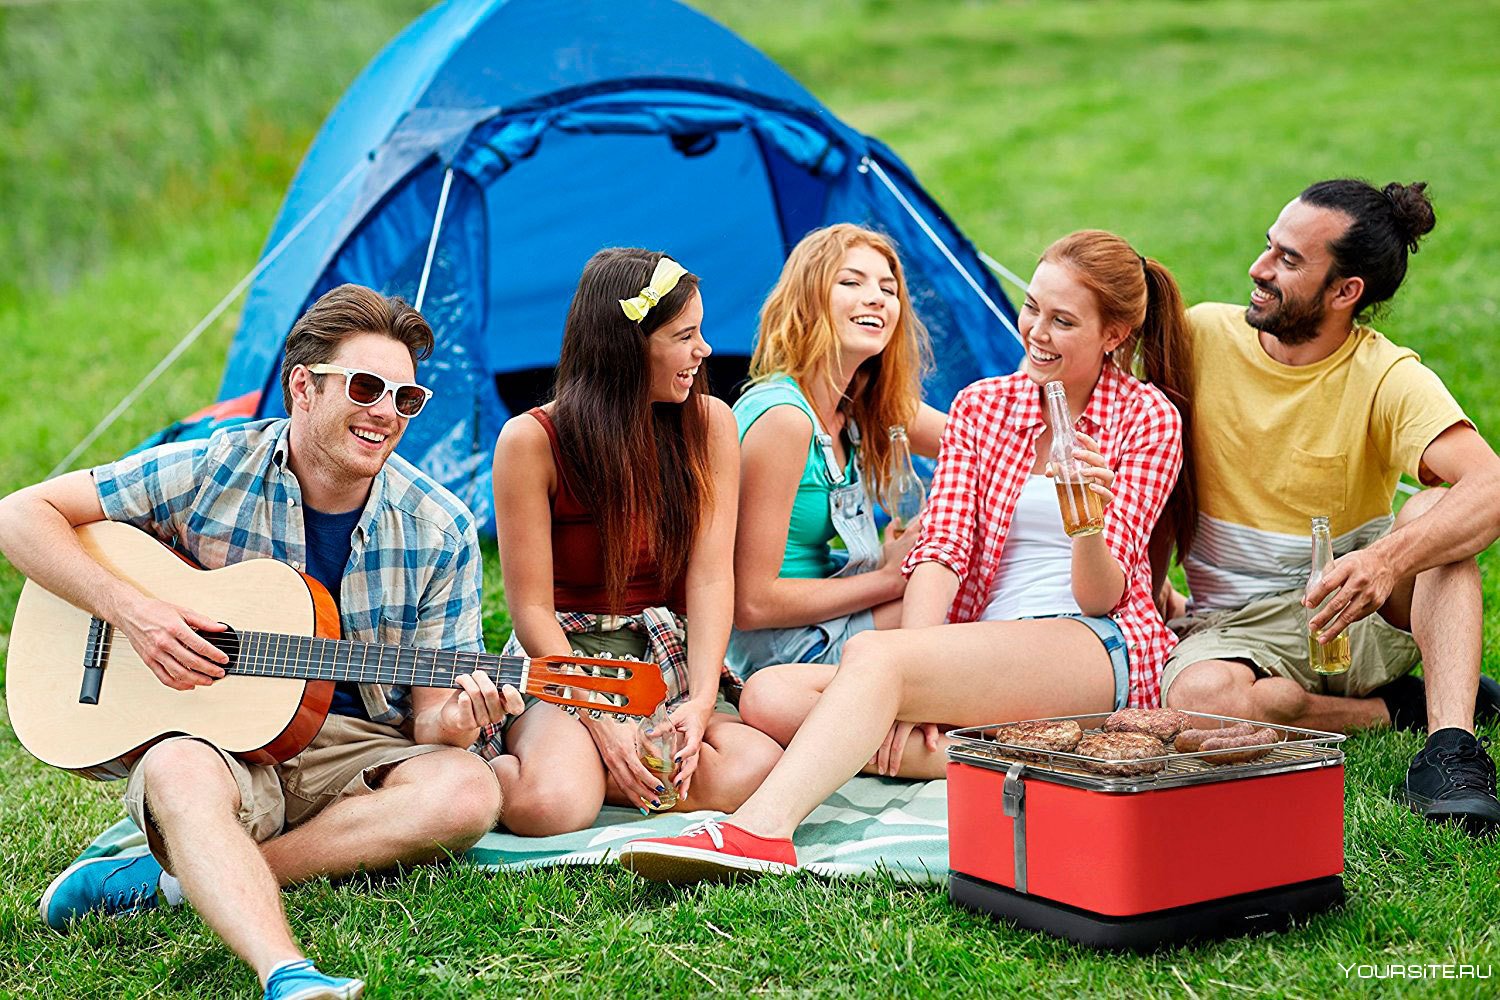 Teen friends screw others camp fan images